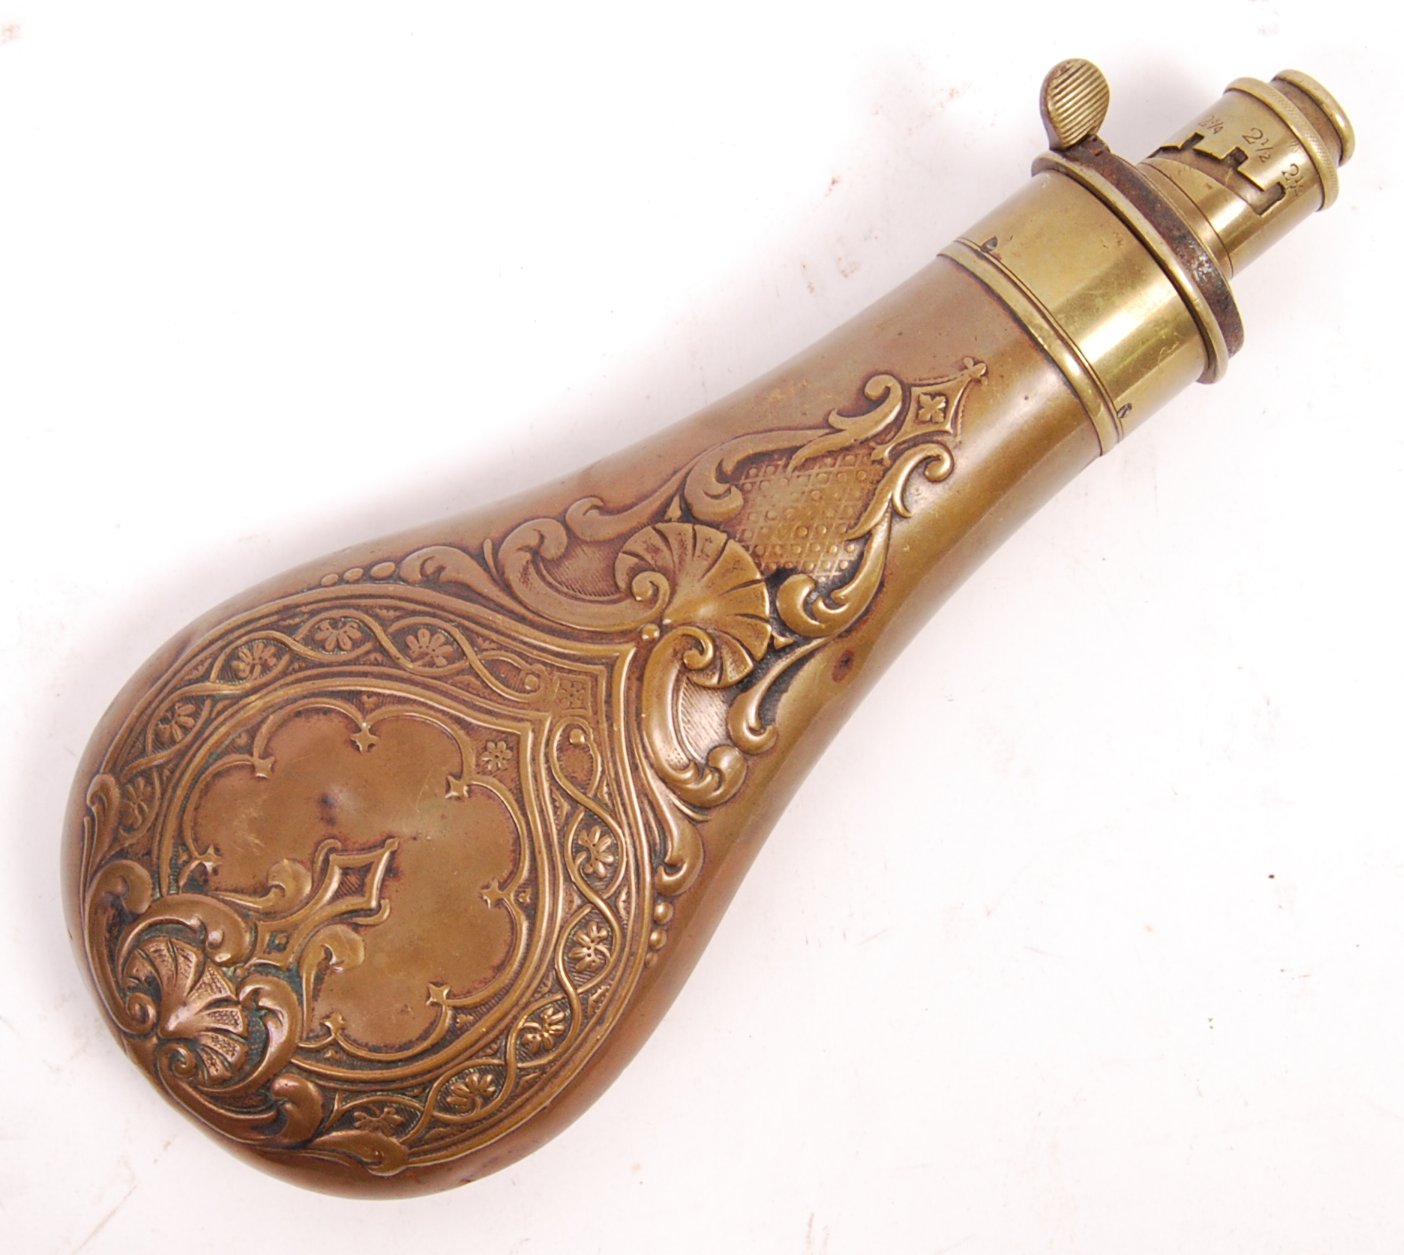 19TH CENTURY BRASS GUN POWDER FLASK WITH REPOUSSE DETAILING - Image 2 of 4